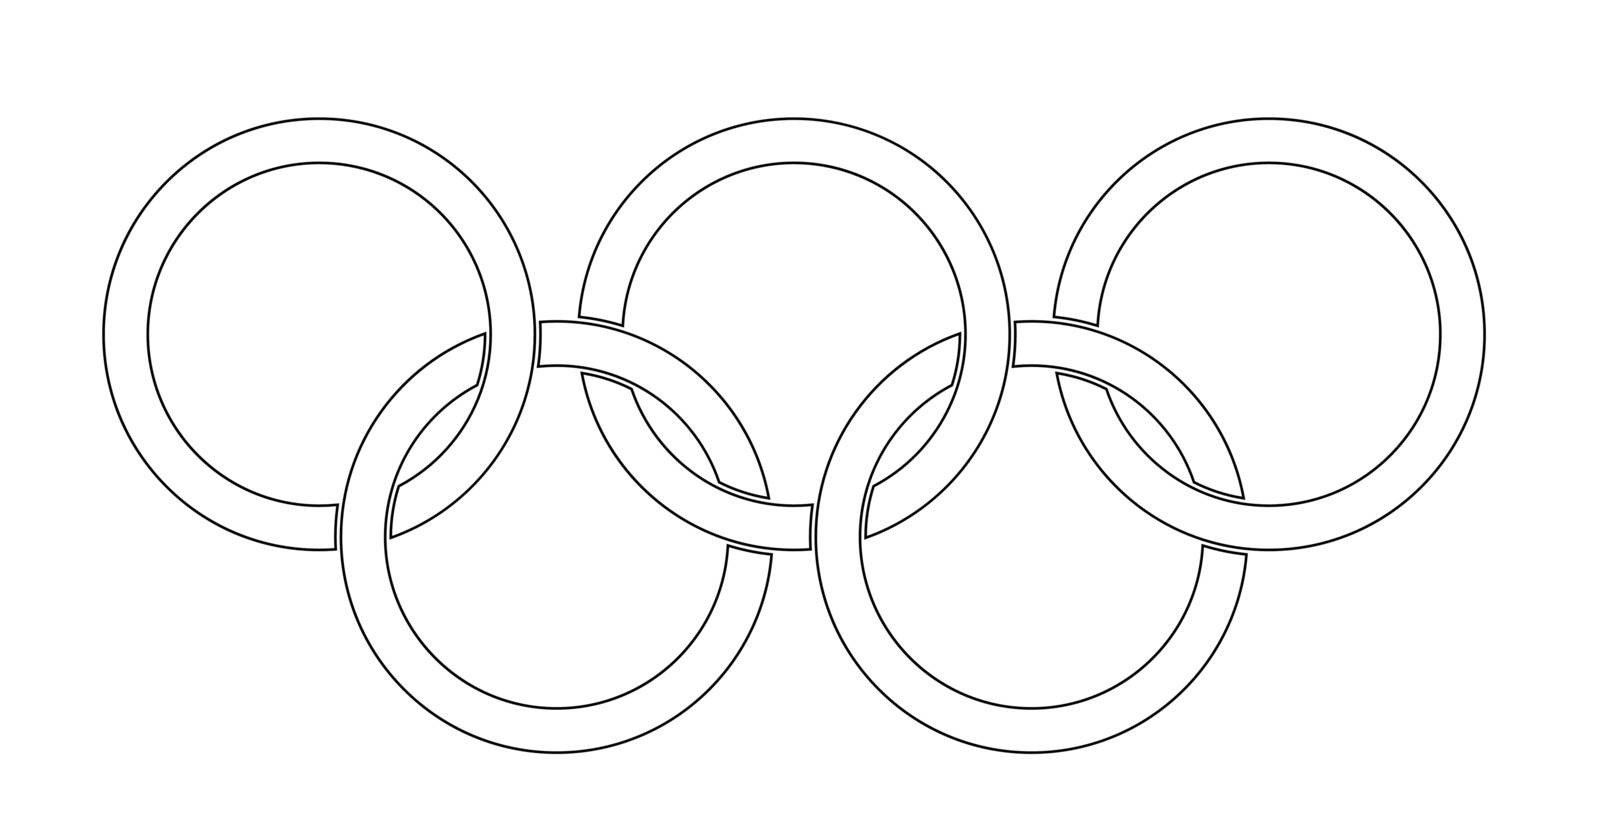 Olympic style rings set over a white backrounds